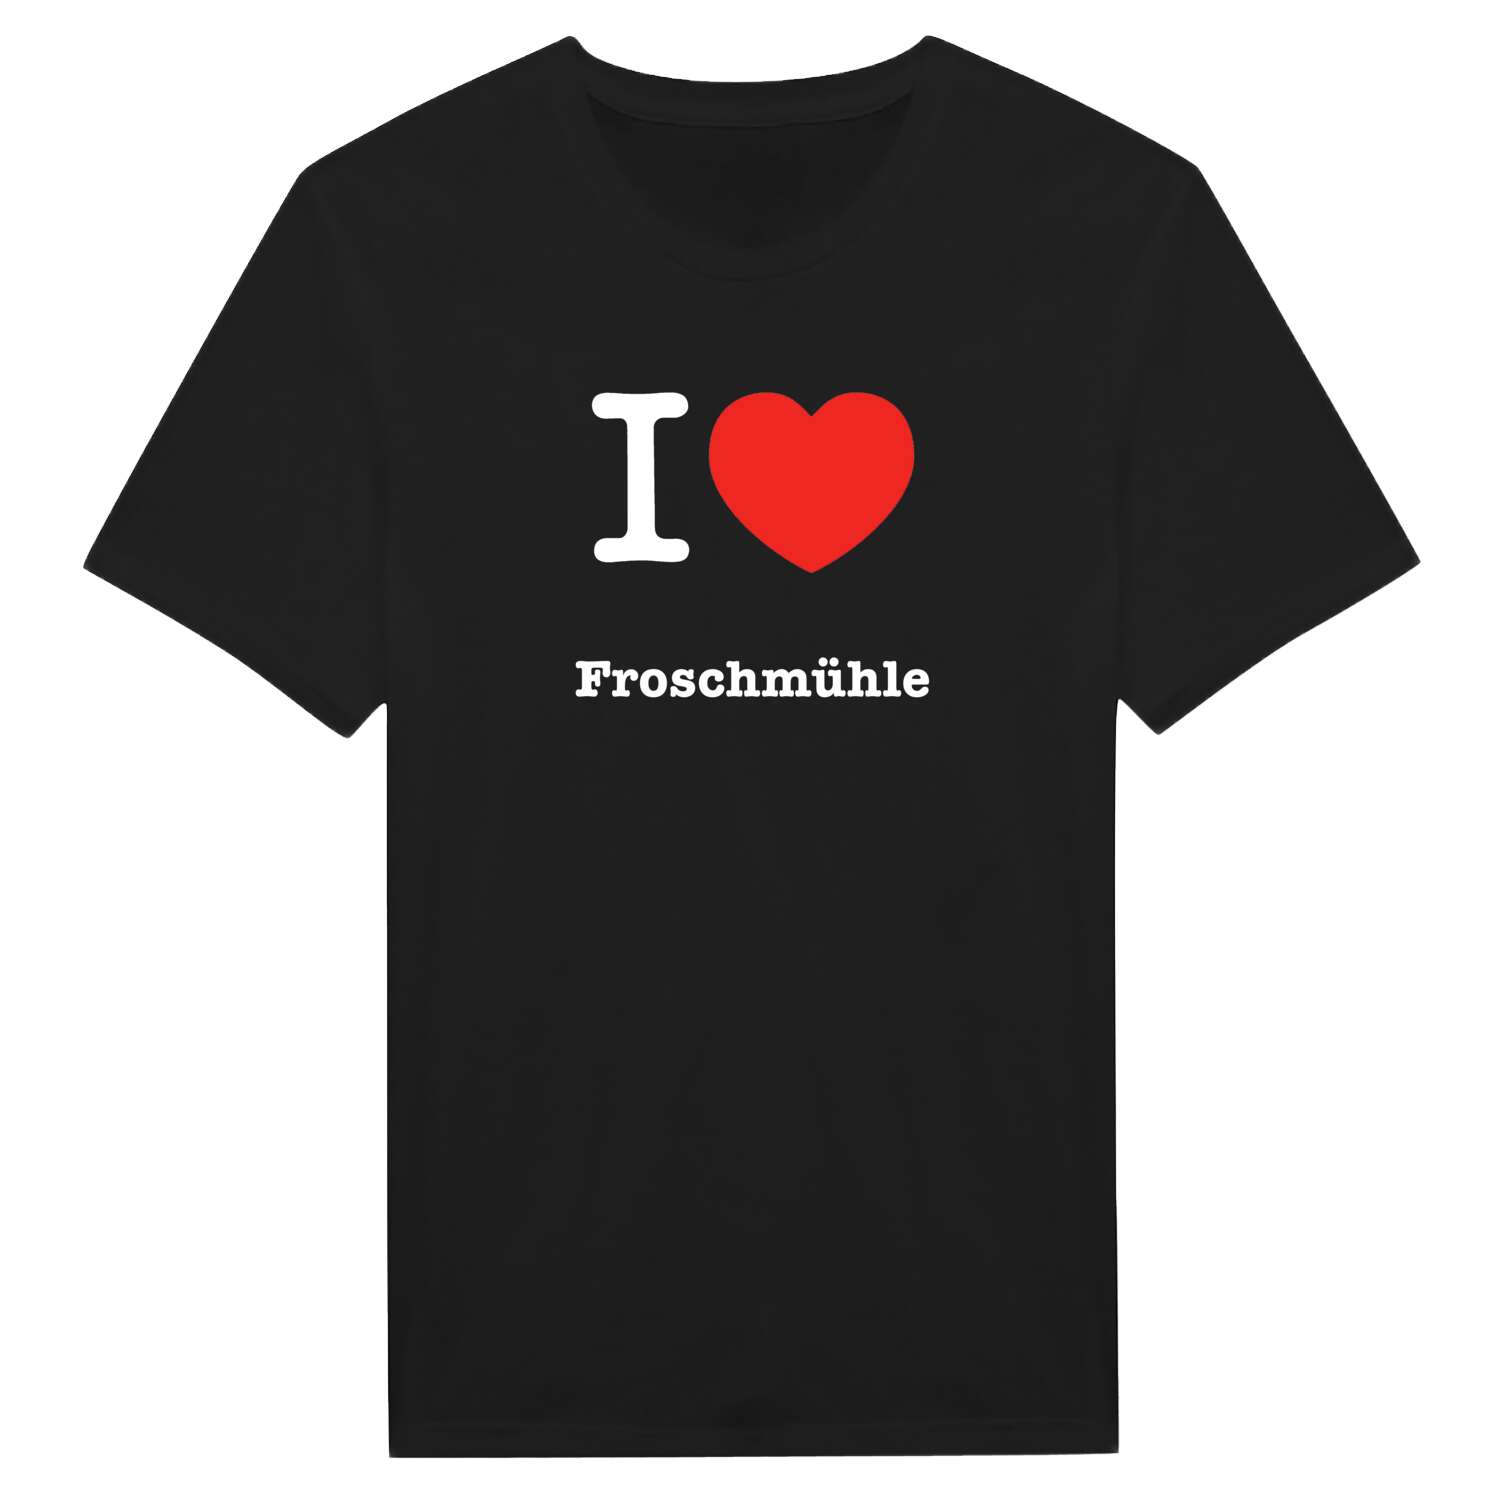 Froschmühle T-Shirt »I love«